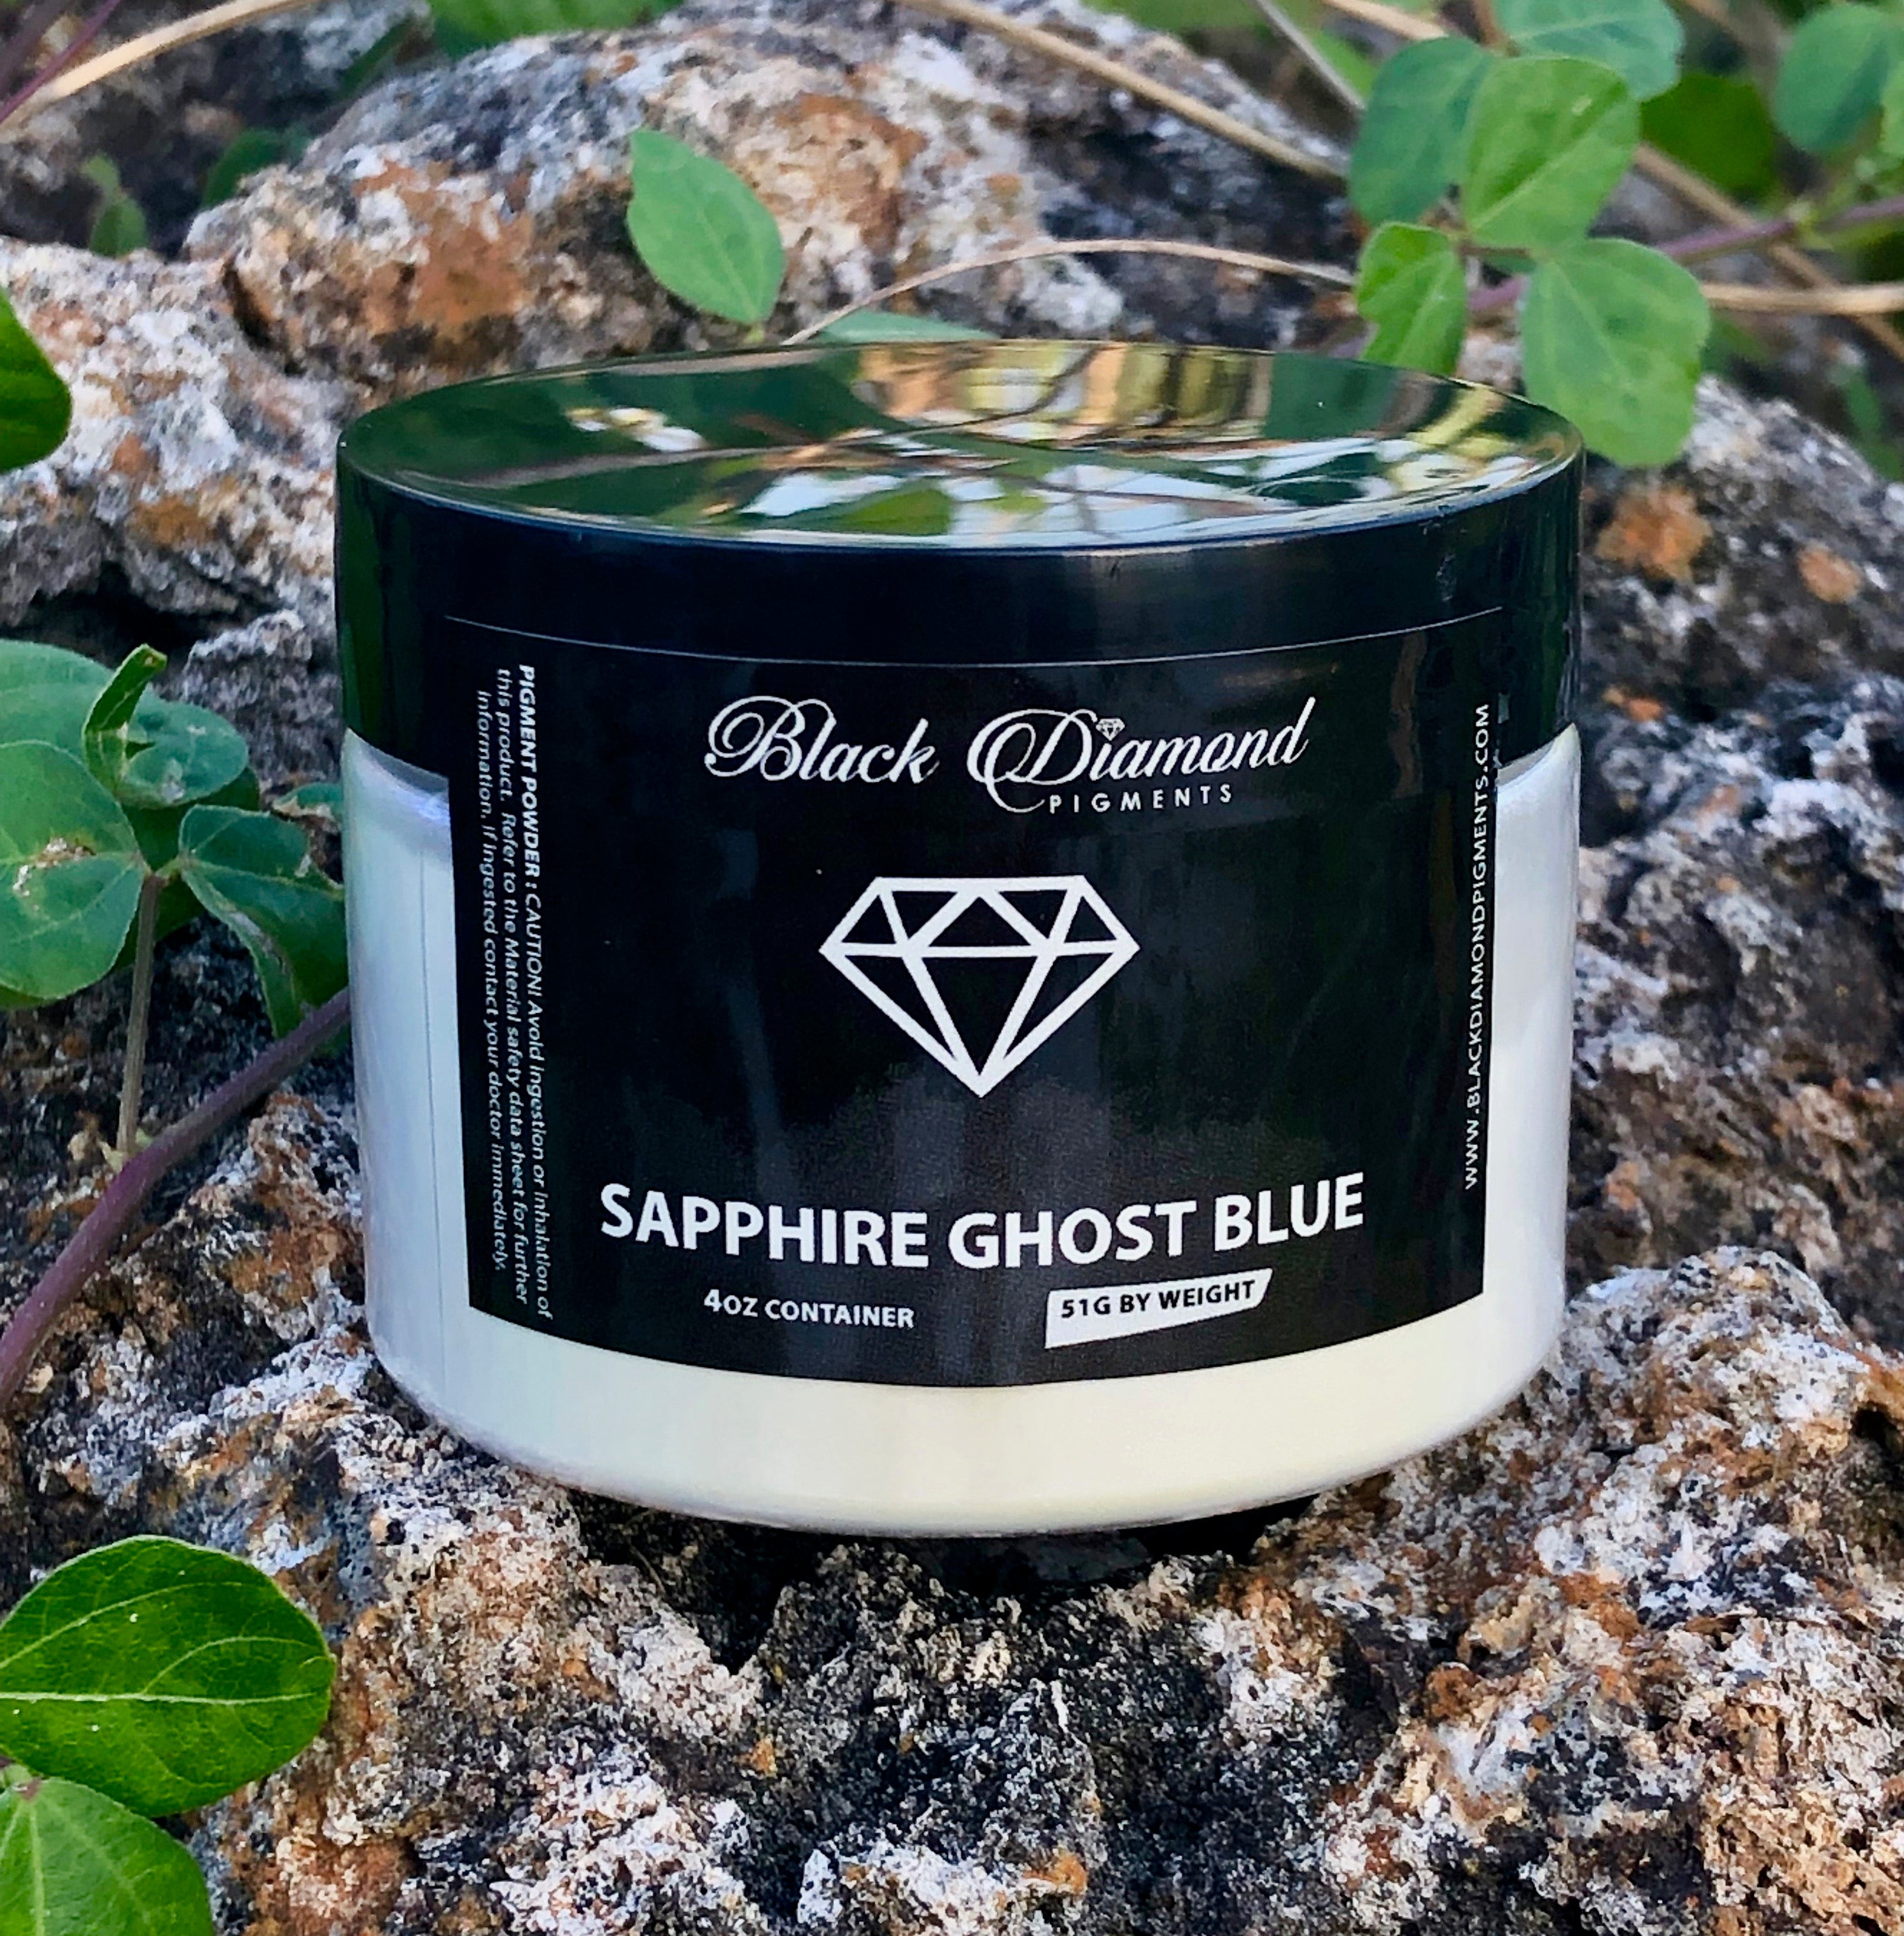 😱UNREAL👻Ghost Blue Effect on Black Epoxy!  😱UNREAL👻Ghost Blue Effect  on Black Epoxy! - Wowzers, take a look at this Ghost Blue pigment when it  hits the black epoxy! This is called